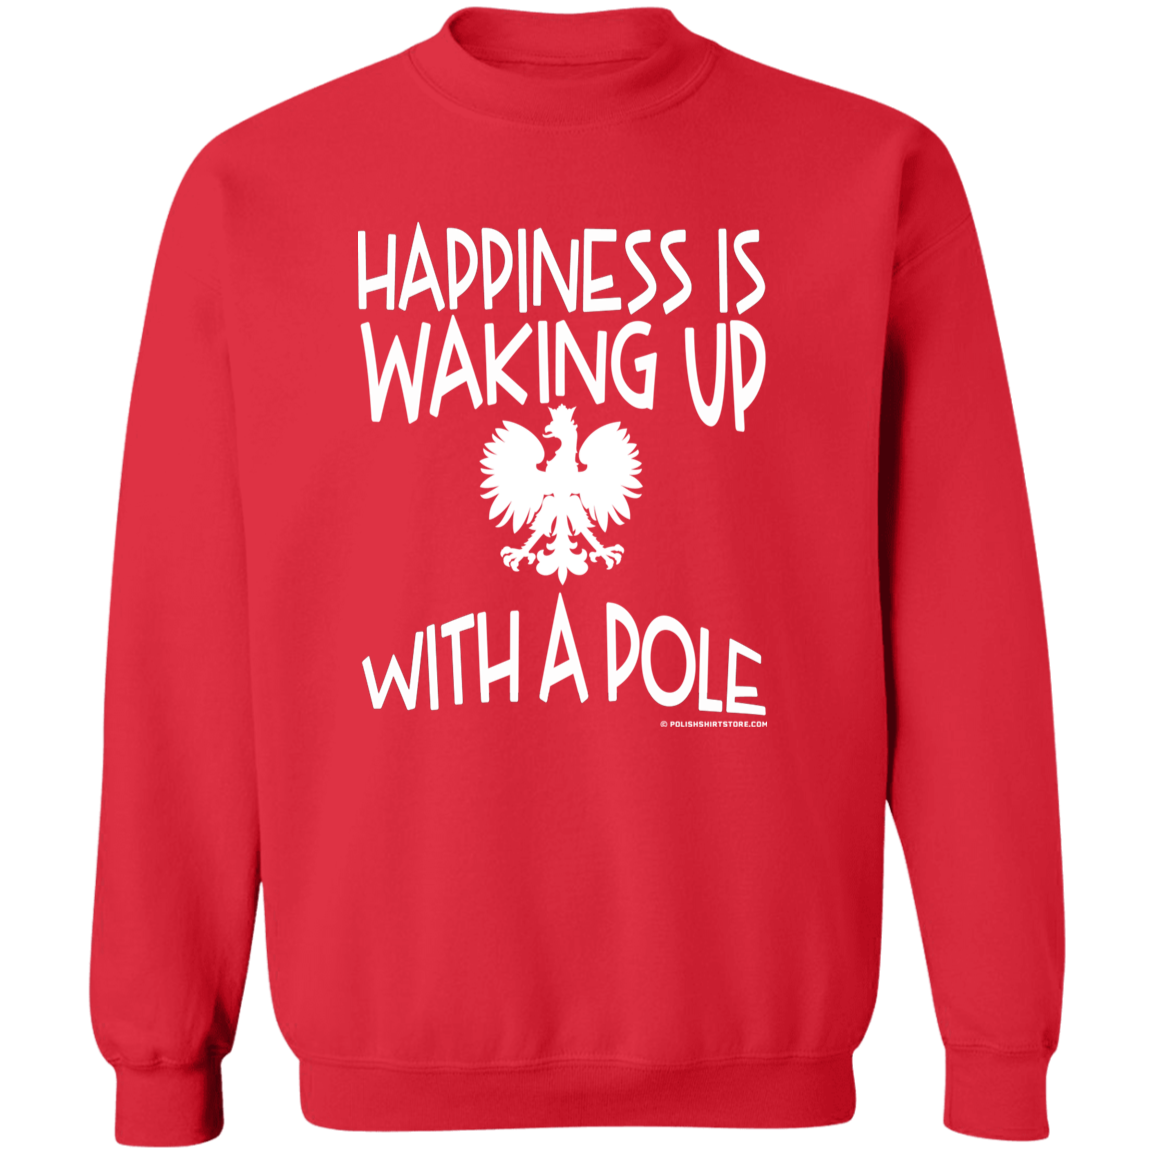 Happiness Is Waking Up With A Pole Apparel CustomCat G180 Crewneck Pullover Sweatshirt Red S